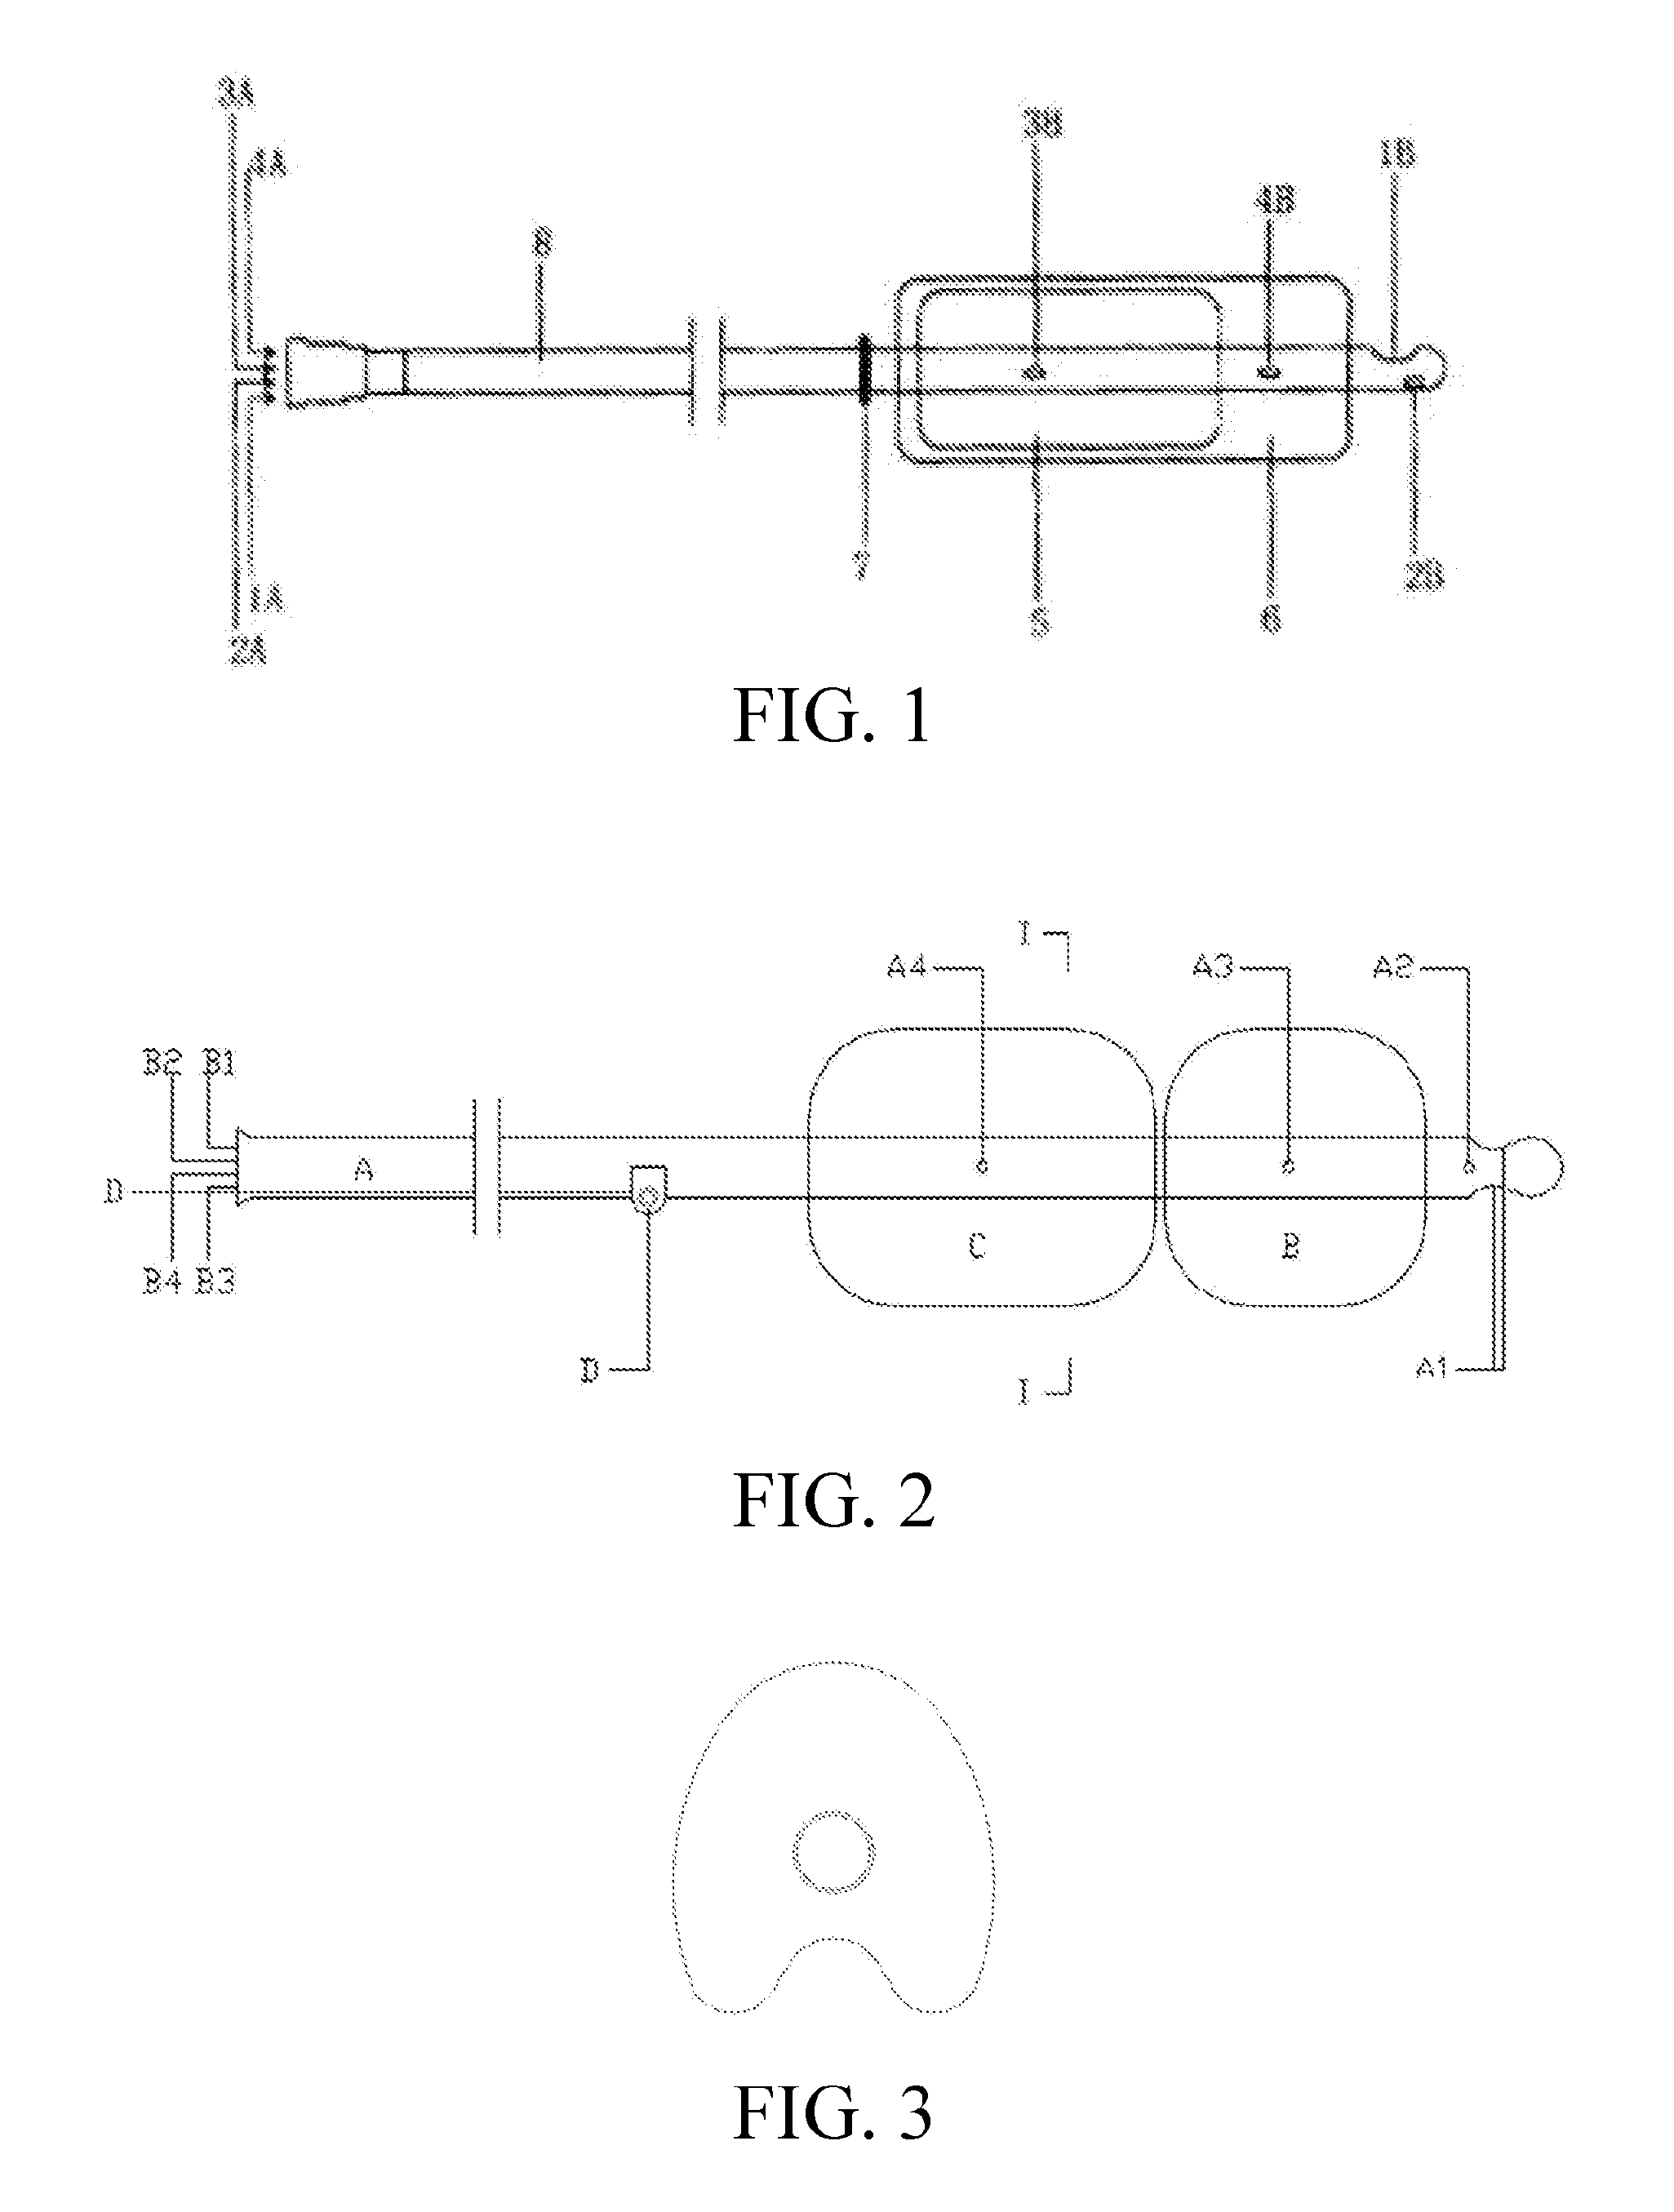 Inspection positioning prostatic capsule expansion catheter